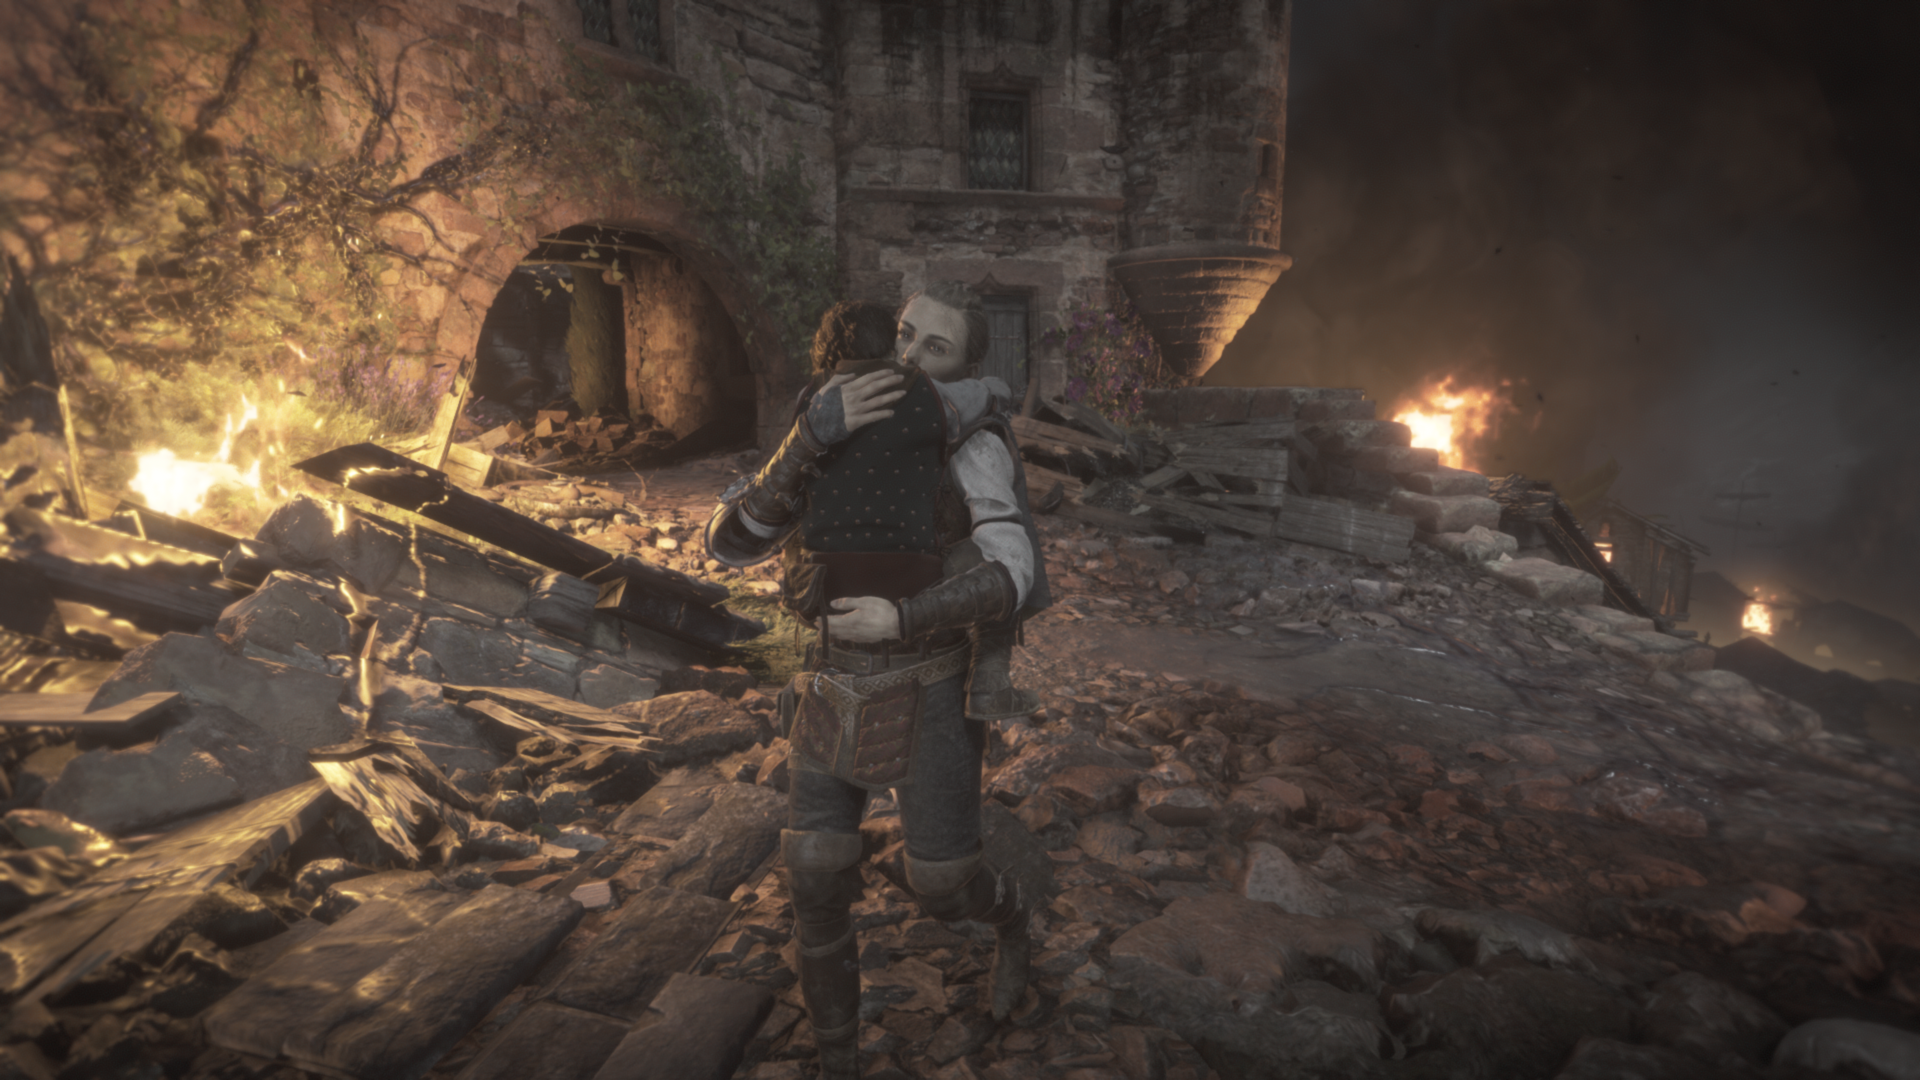 A Plague Tale: Requiem is about to show us the next-generation of video  game rats